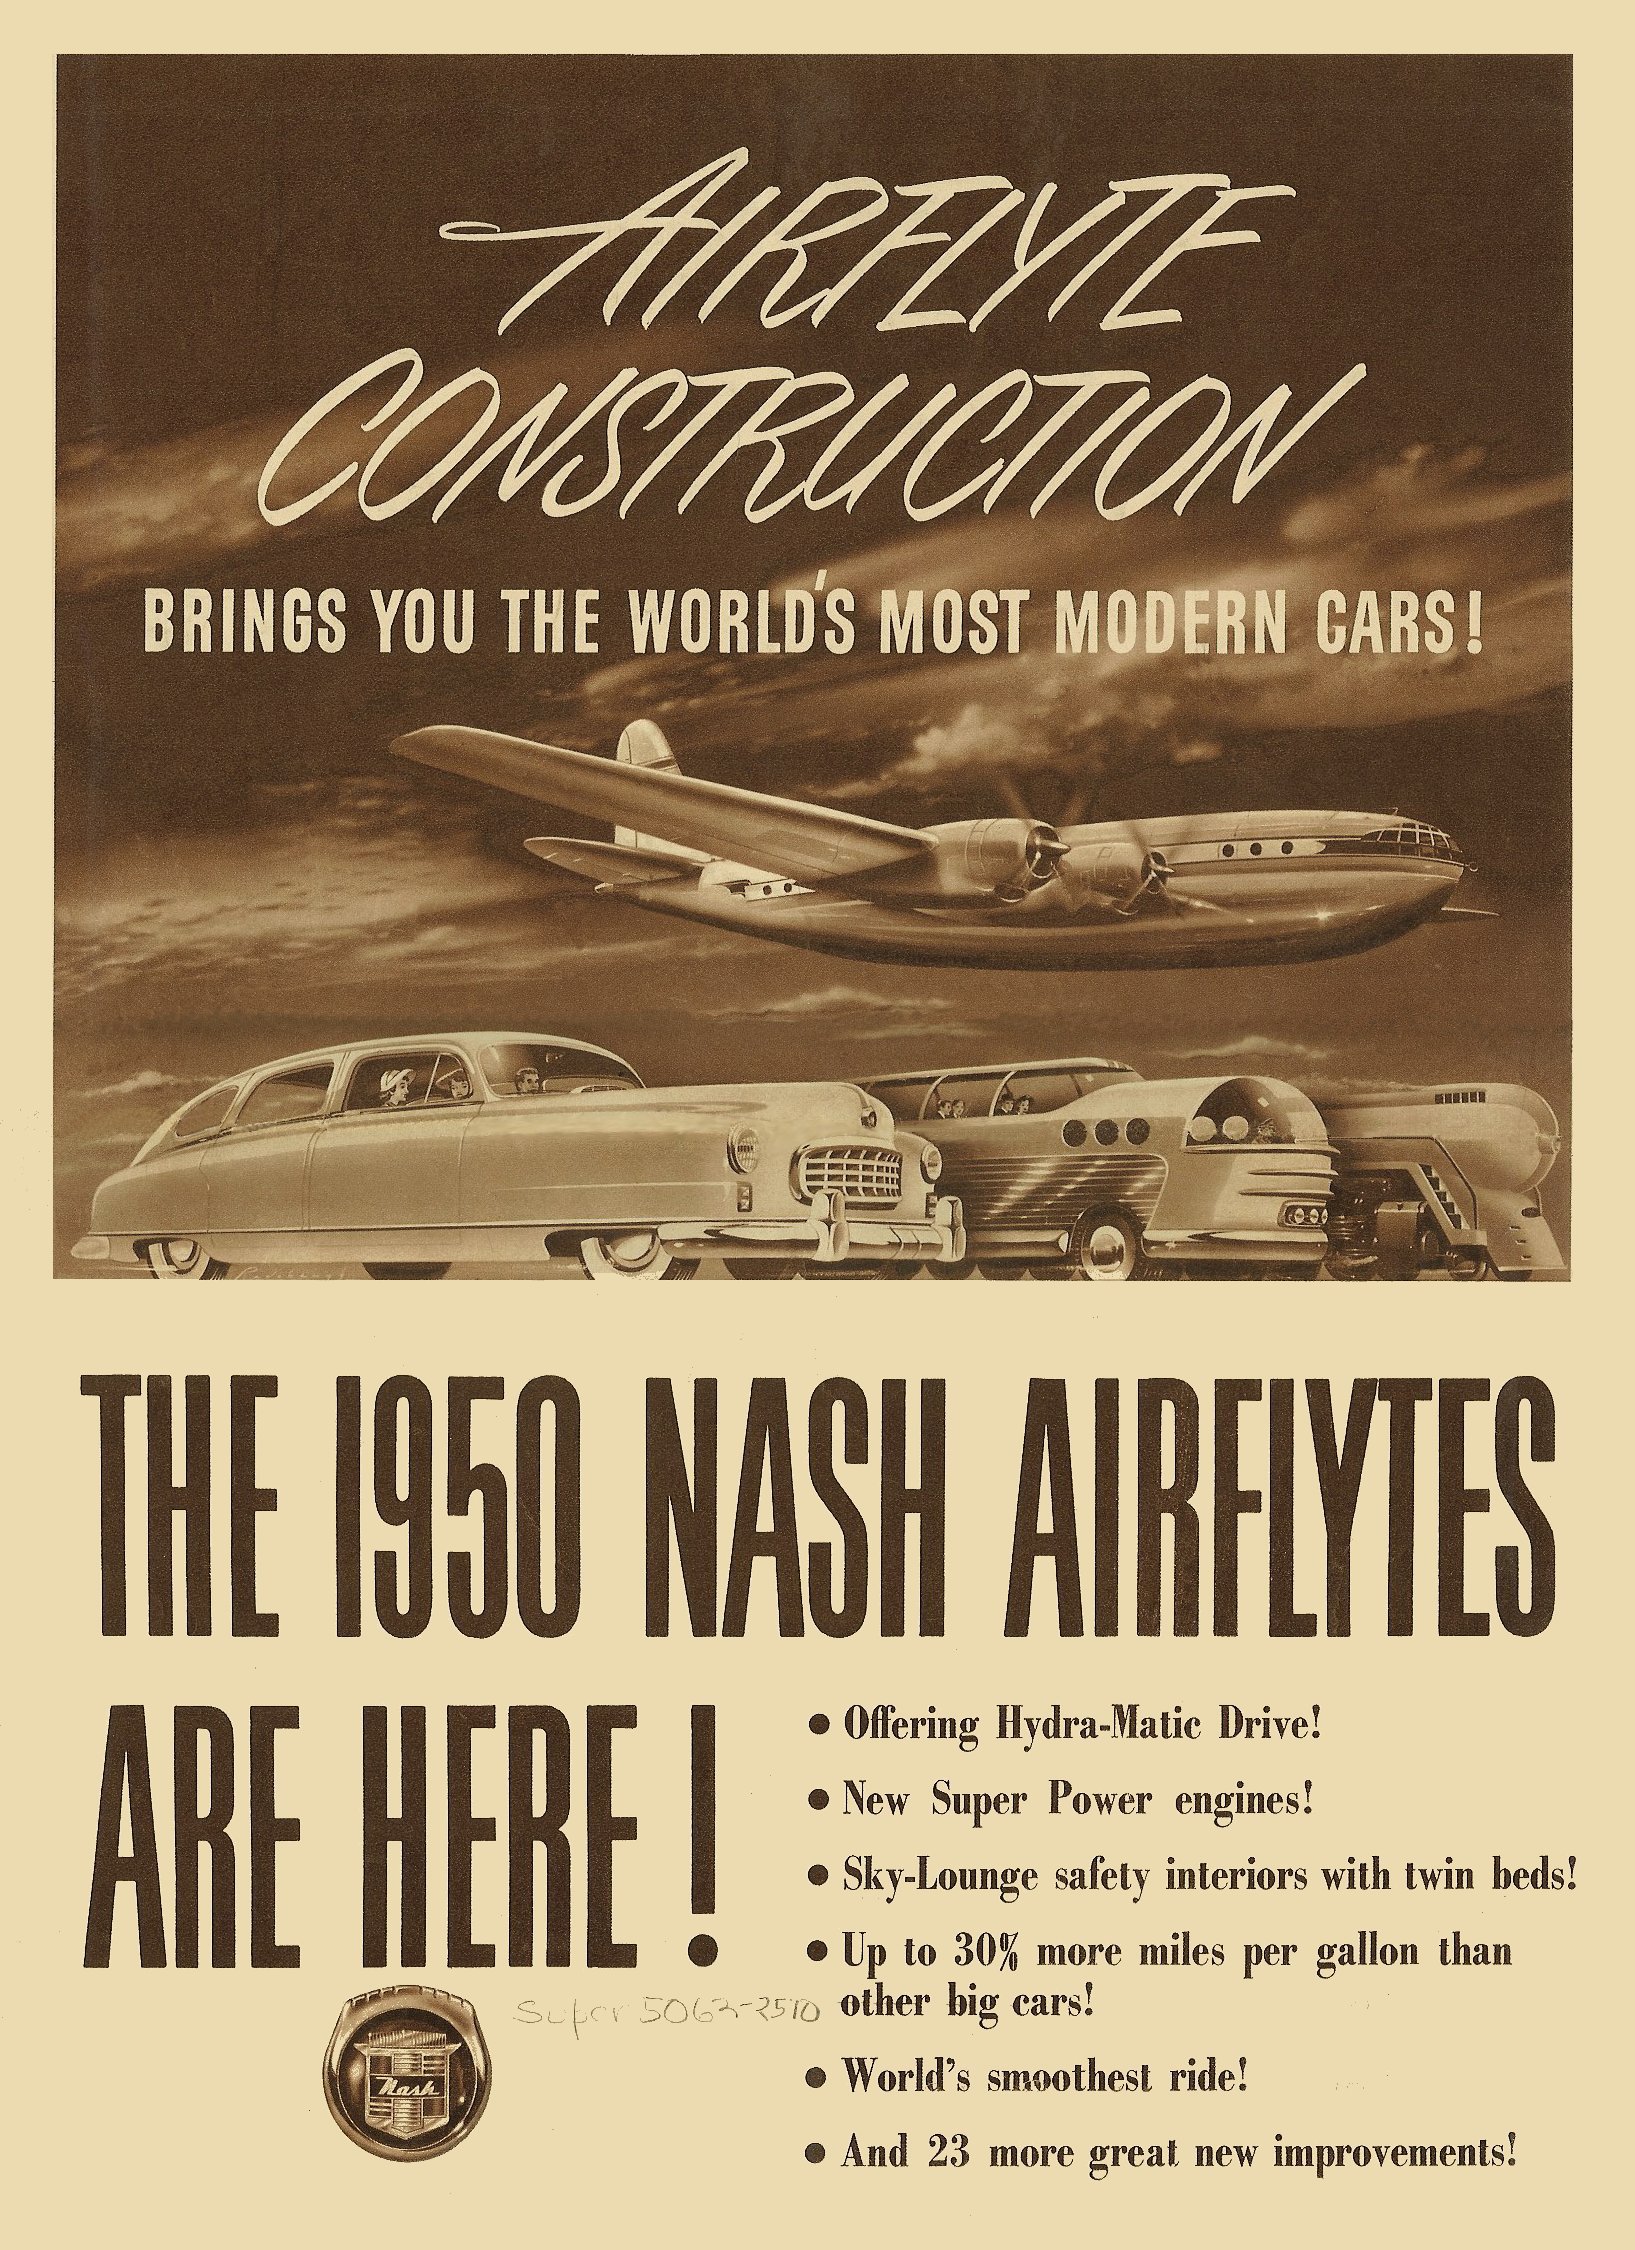 1950 Nash Airflyte Pics, Vehicles Collection